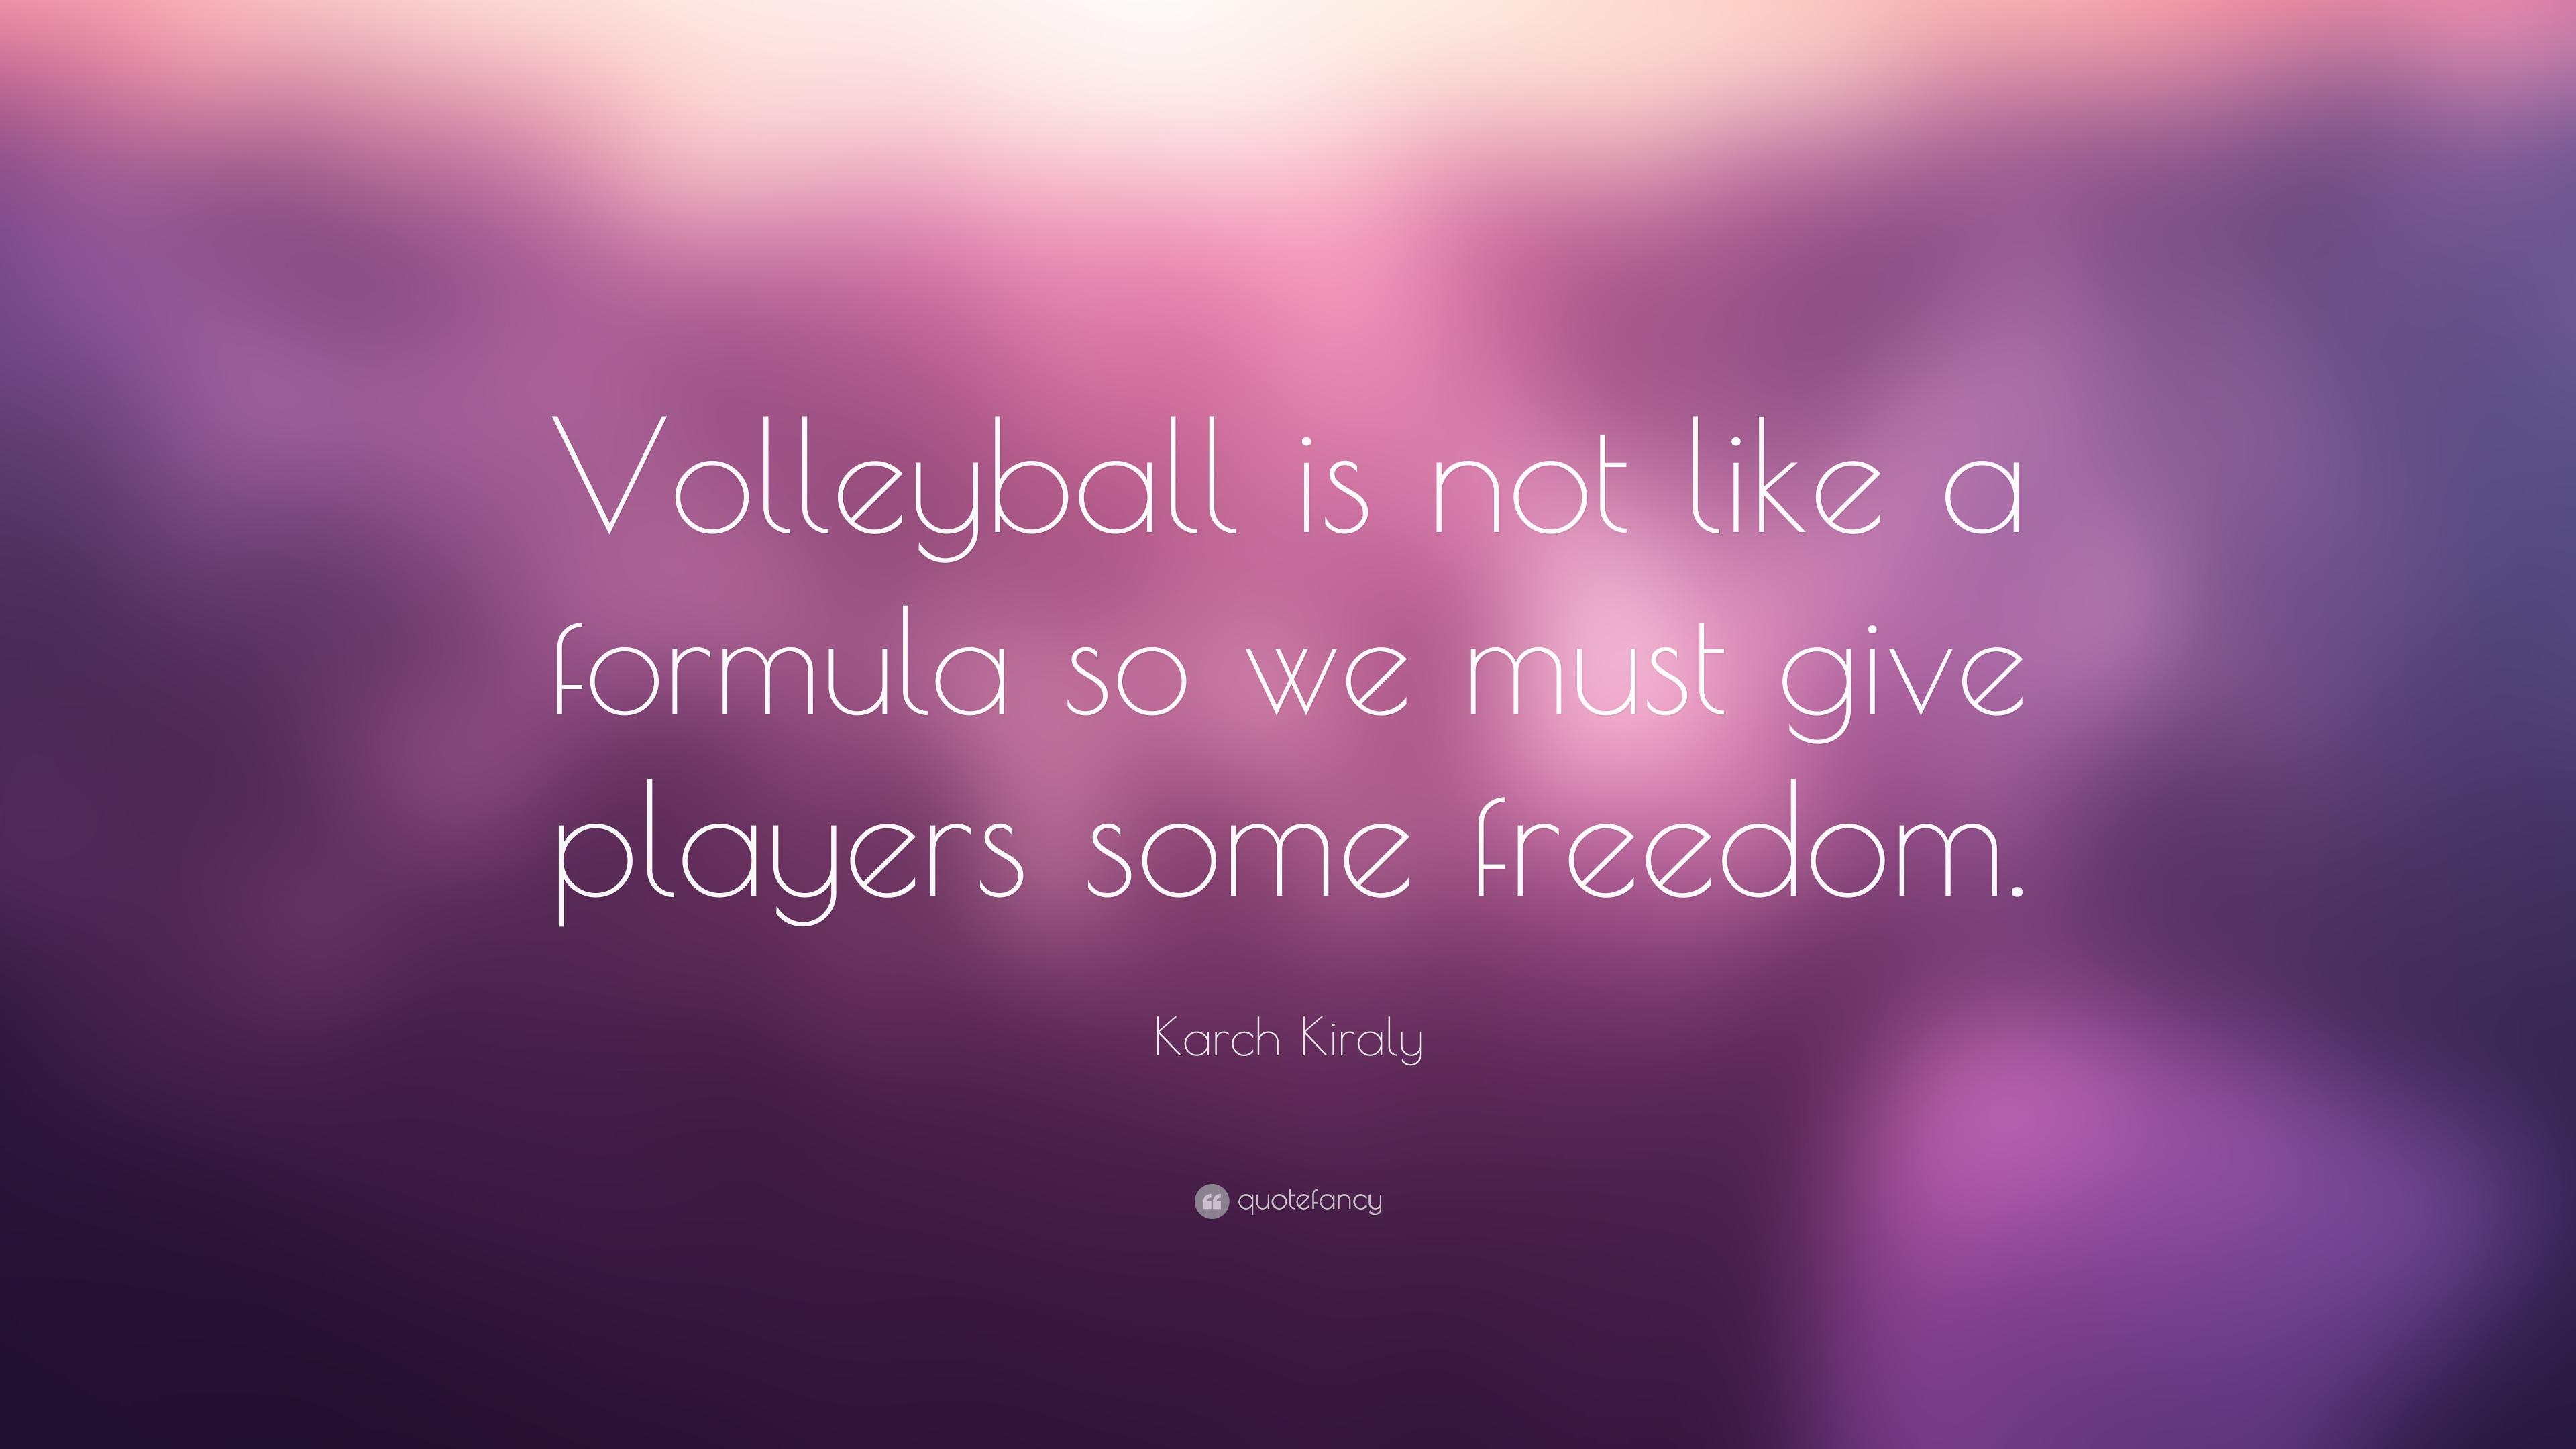 Karch Kiraly Quote: “Volleyball is not like a formula so we must